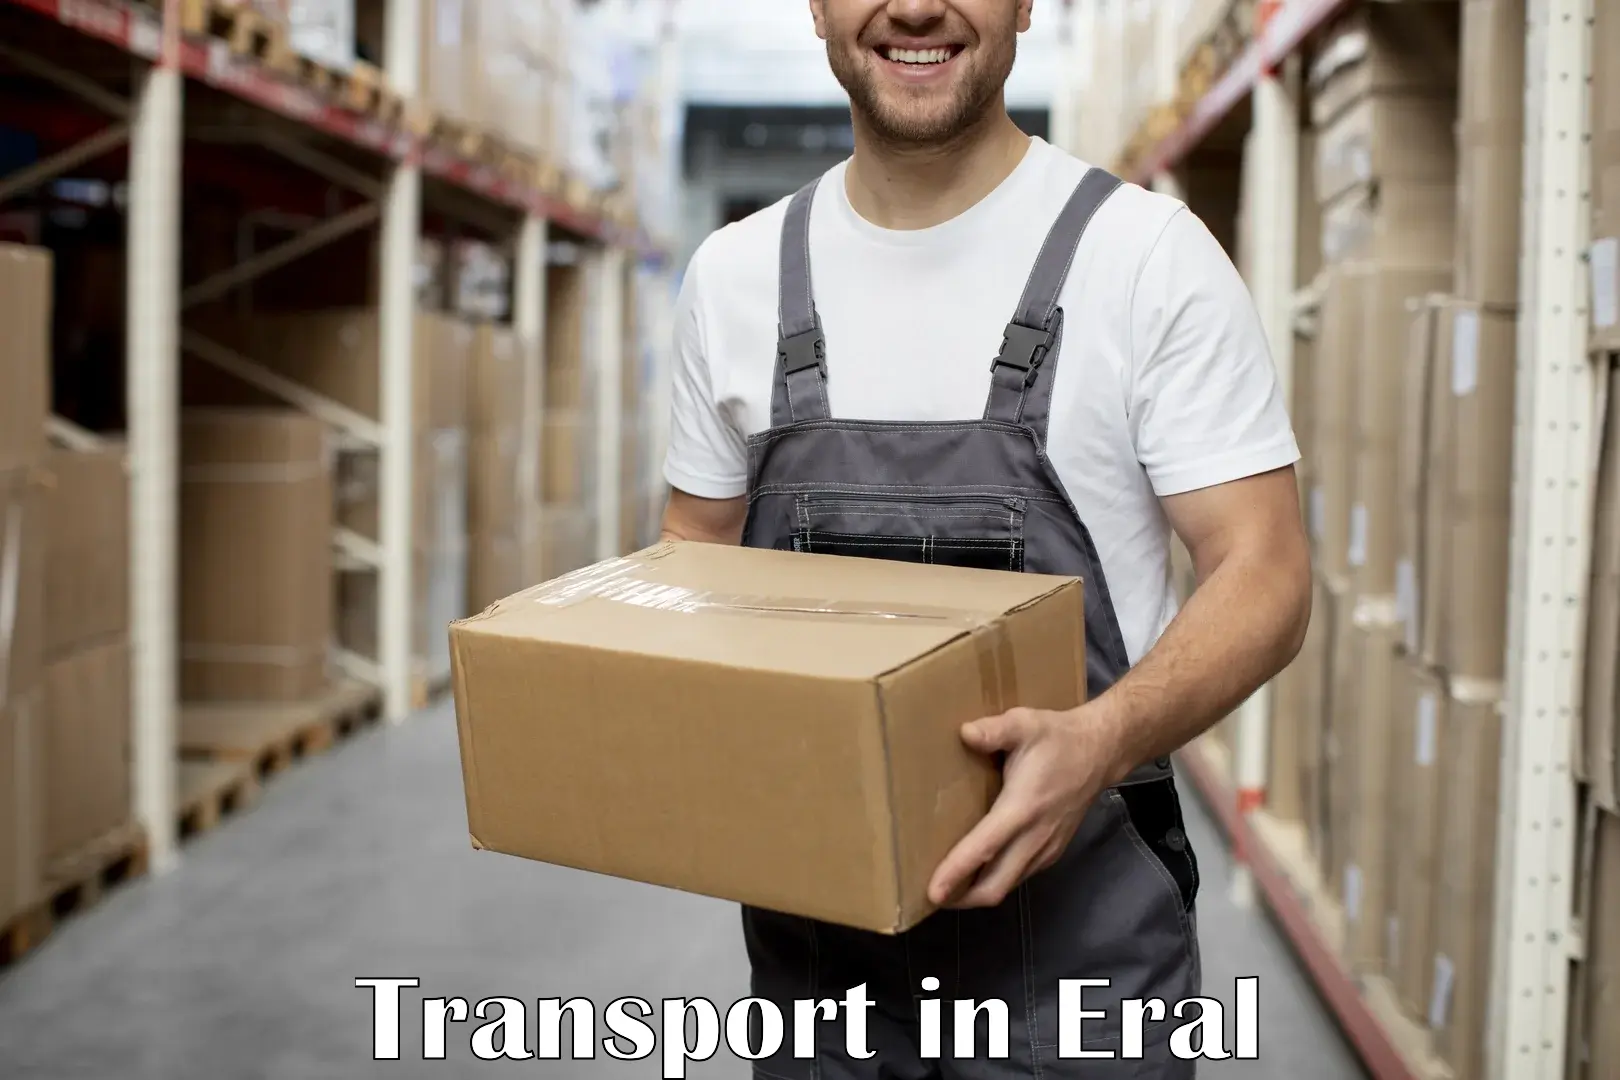 Vehicle parcel service in Eral